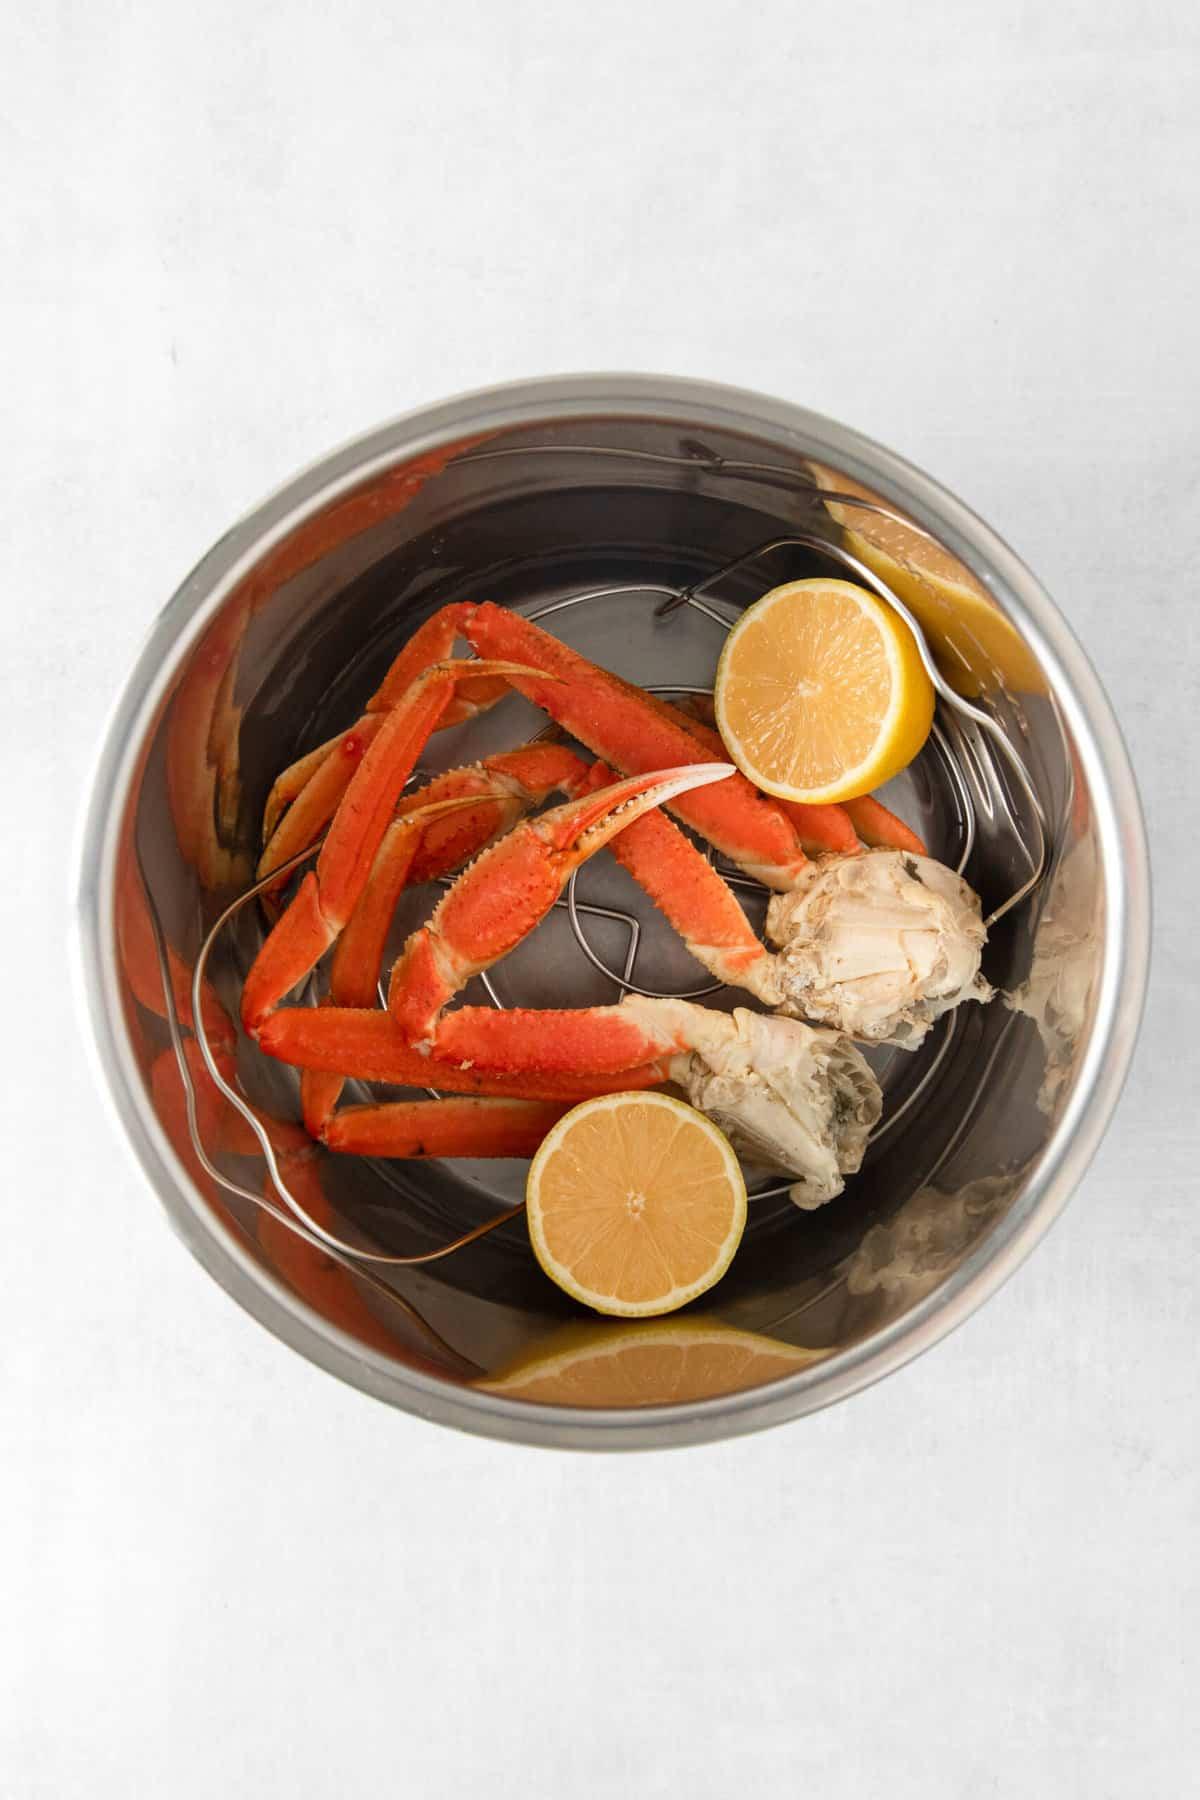 Snow crab legs and lemon in the bowl of an Instant Pot.